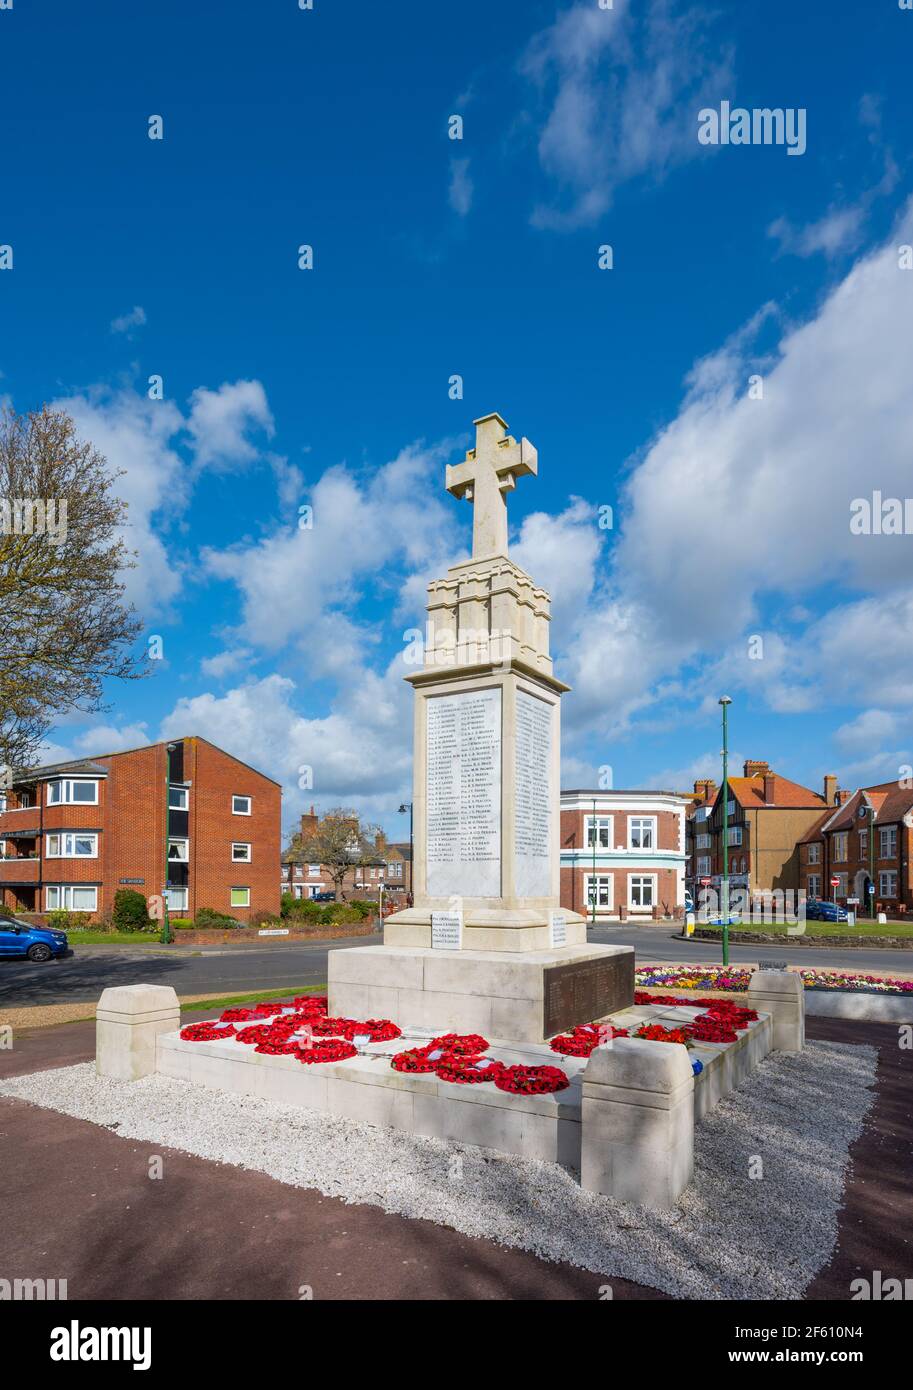 Reefs laid at a War Memorial at Caffyns Field in Beach Road in Littlehampton, West Sussex, England, UK. Stock Photo